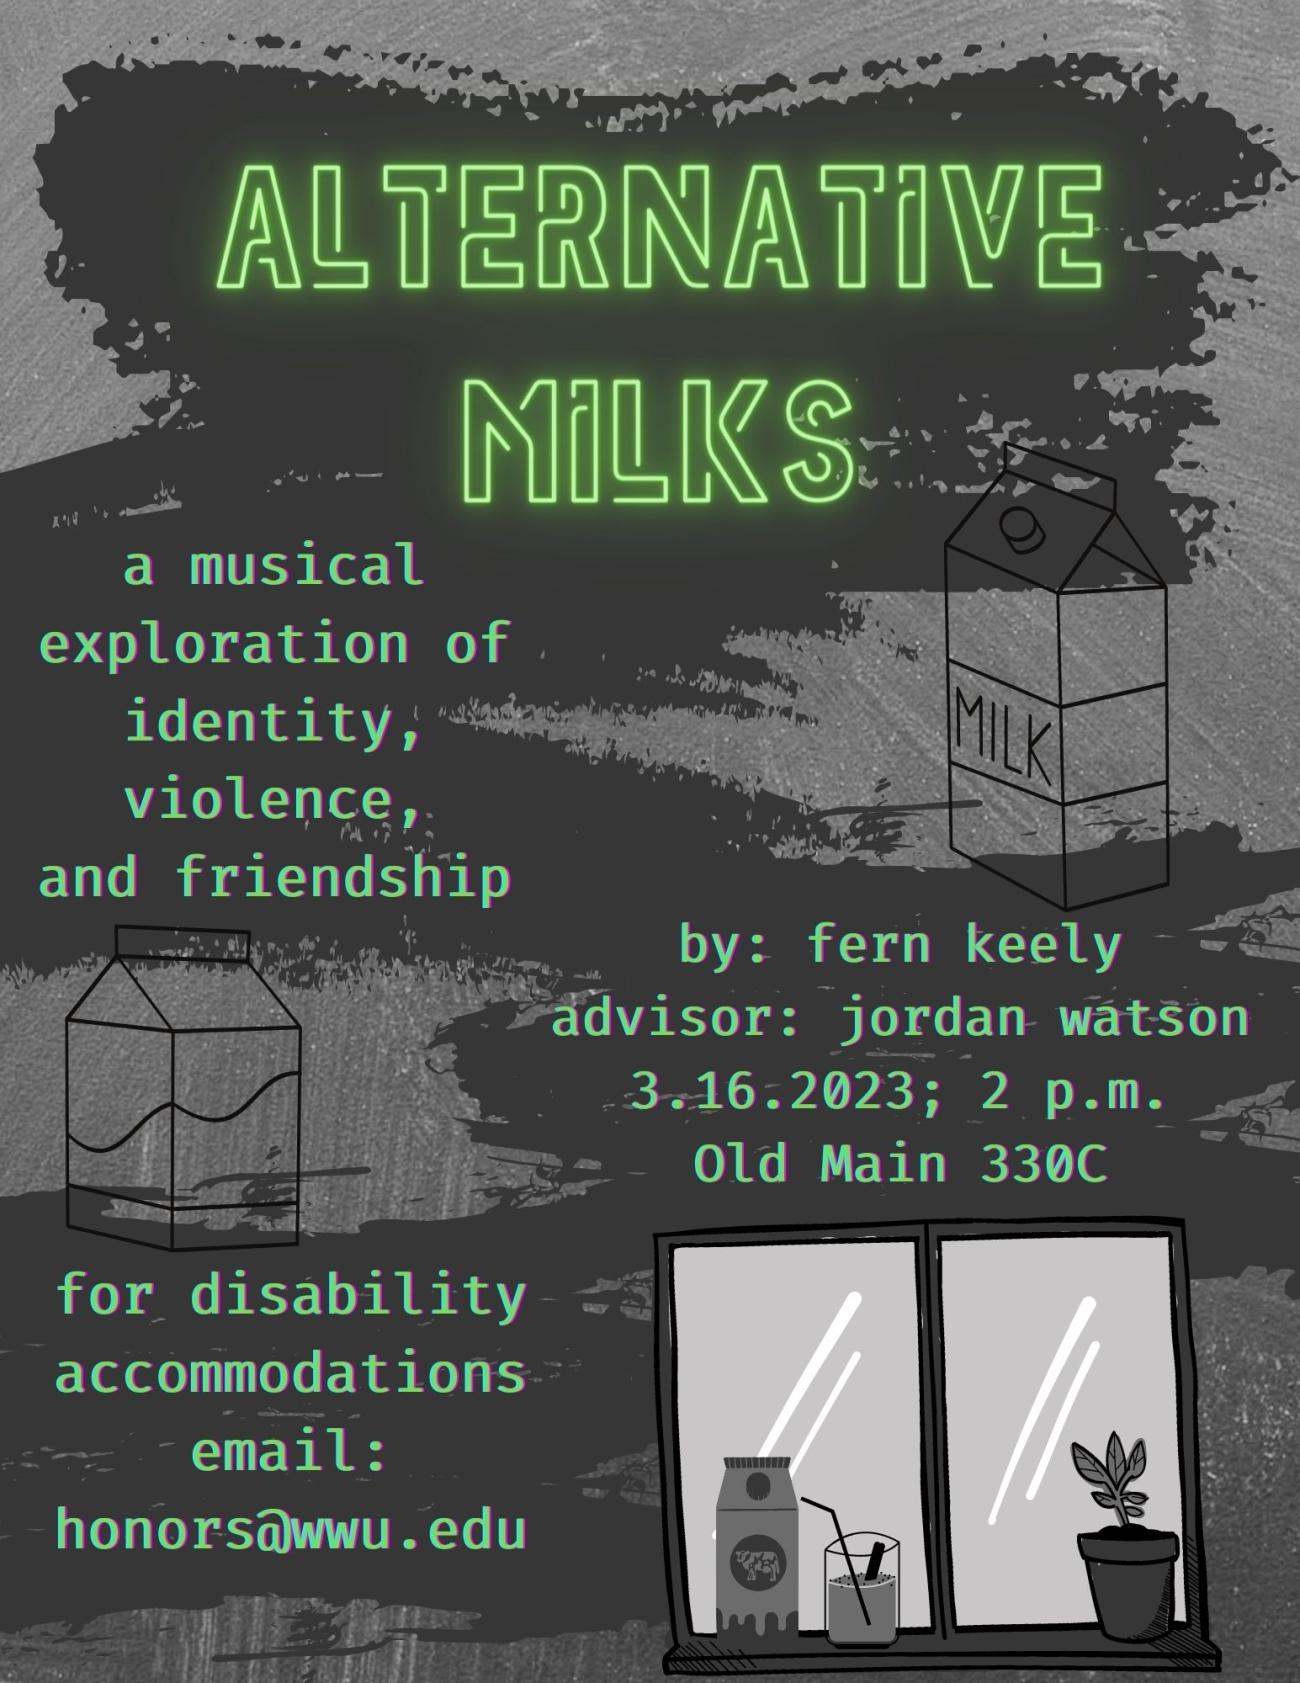 A grayscale poster with paint strokes behind green text. The title, "Alternative Milks," is written in neon sign font. The description is written in coding-style font and reads "A musical exploration of identity, violence, and friendship. By Fern Keely, advisor Jordan Watson. March sixteenth, 2023, 2 p.m.. Location: Old Main 330C. For disability accommodations please email honors@wwu.edu."